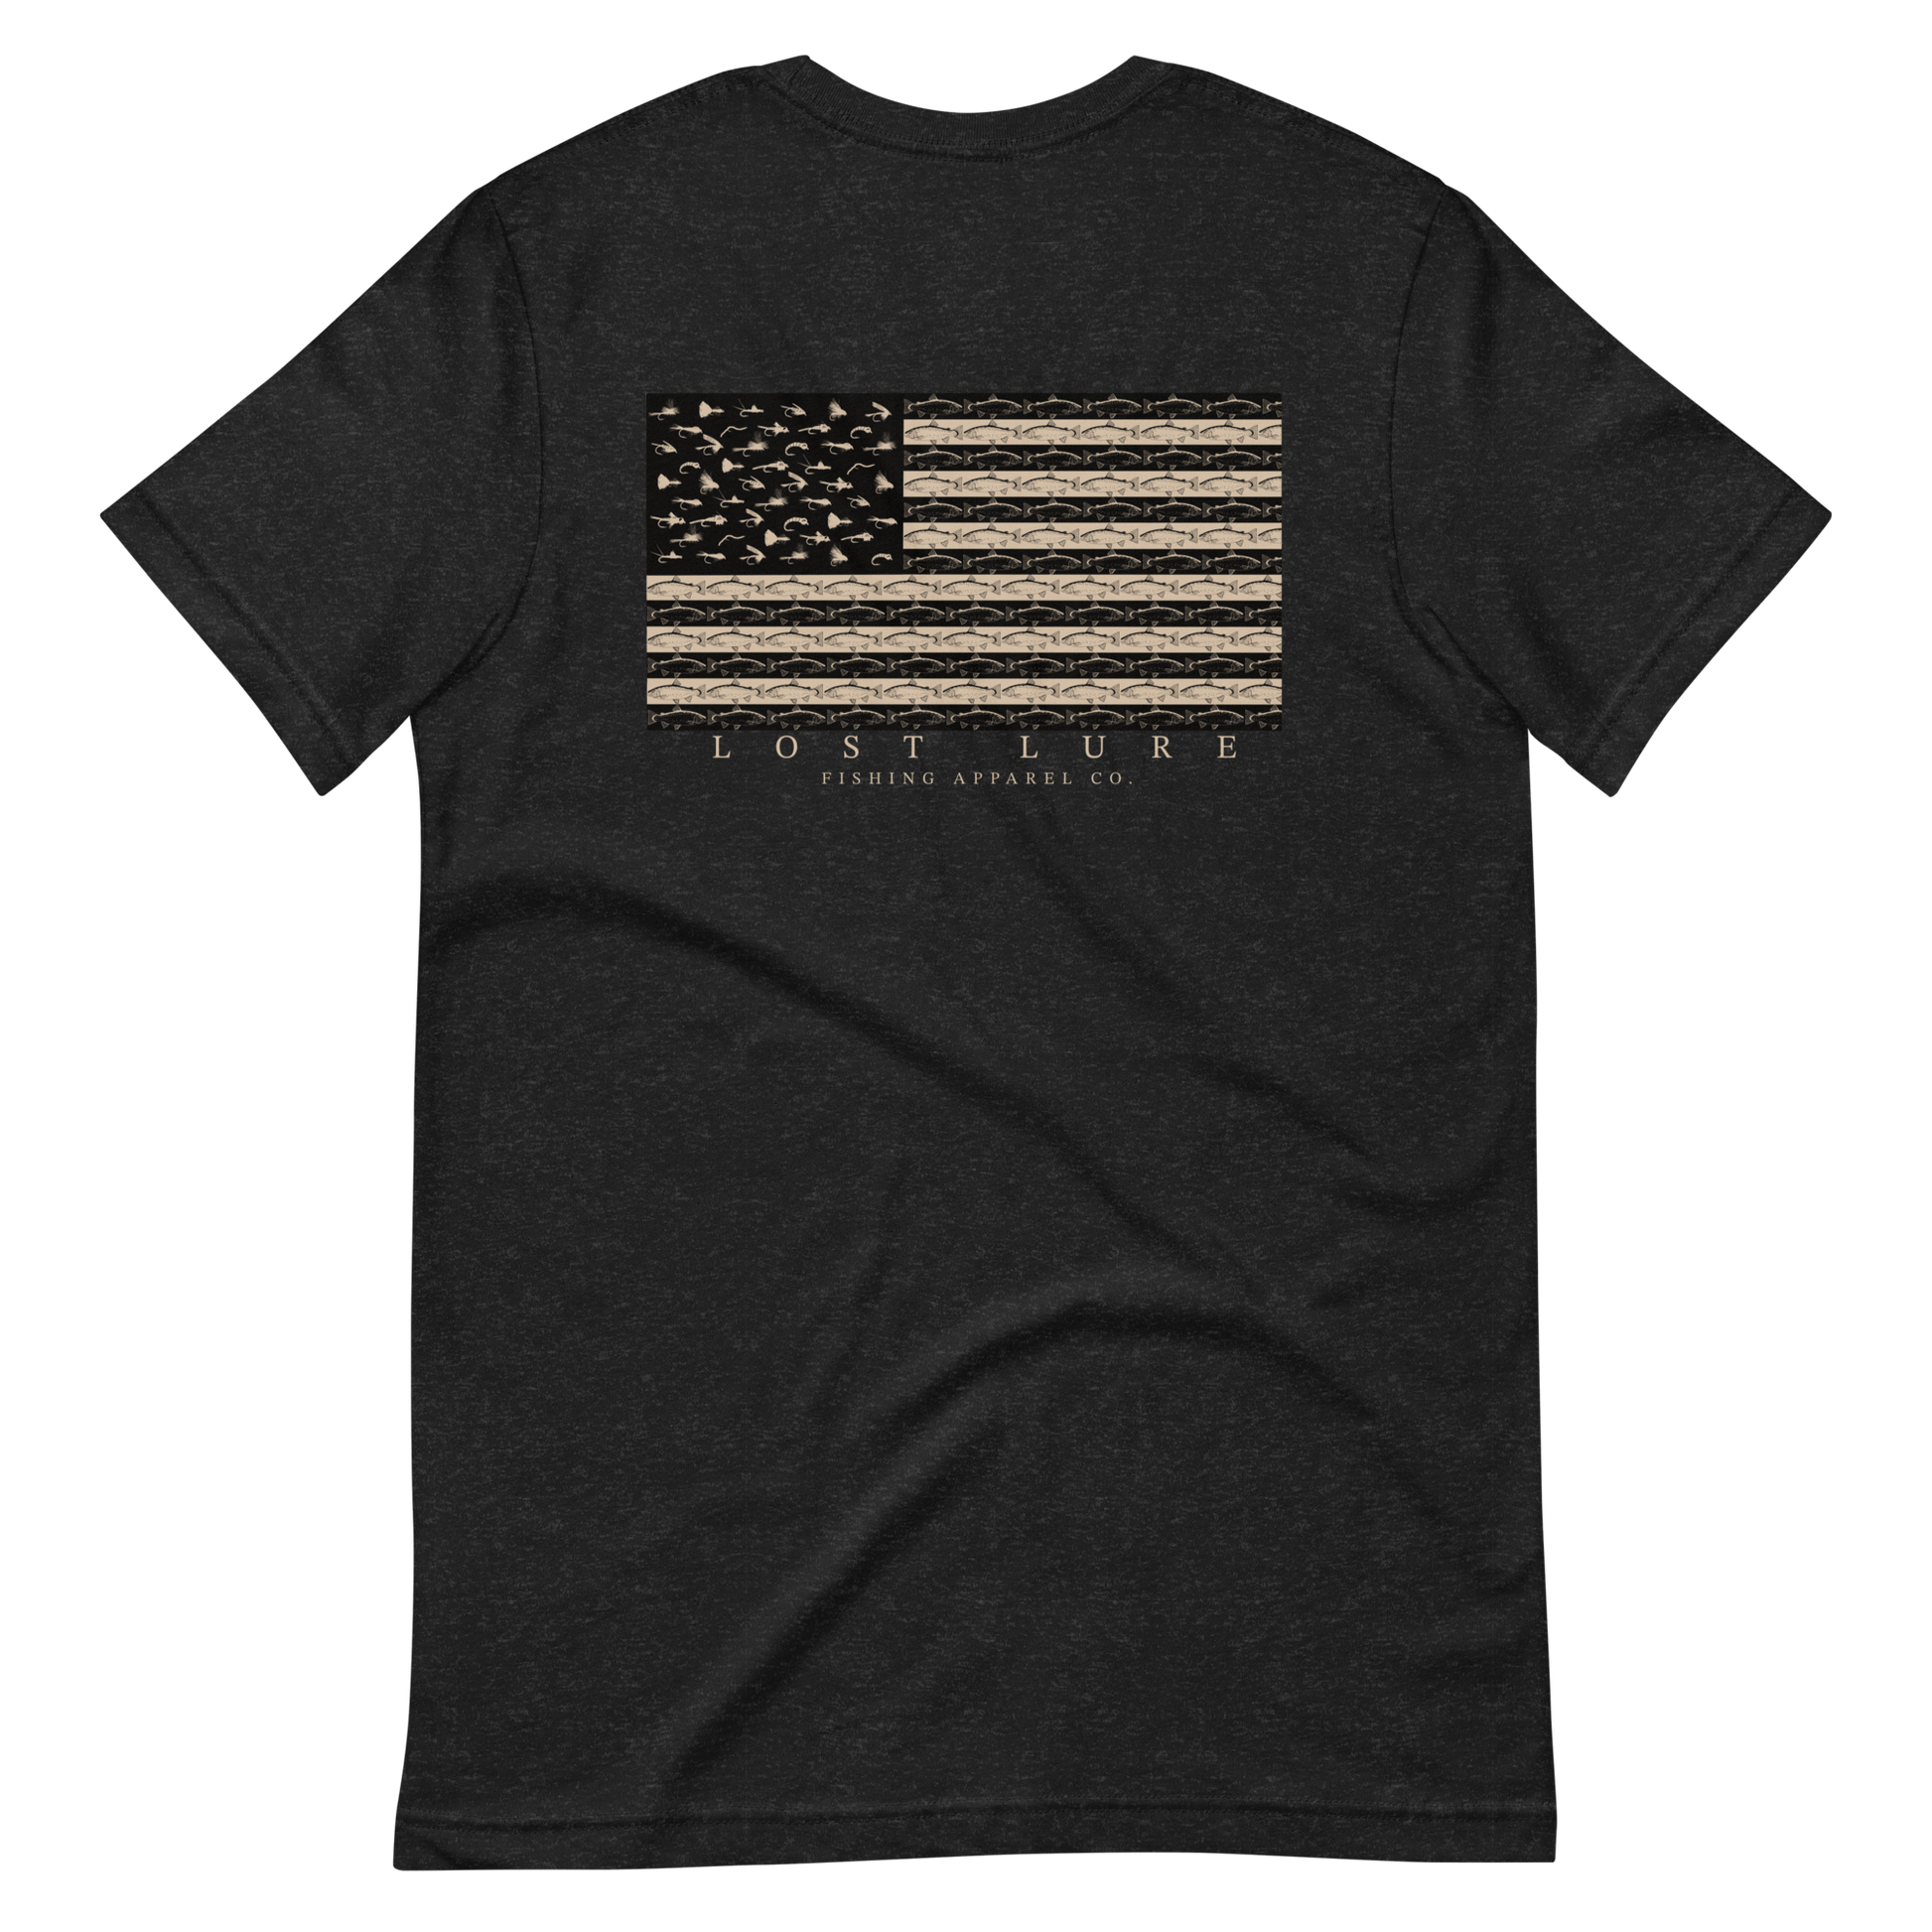 American Flag / US flag fishing shirt. It has 50 flies replacing the stars and trout as the stripes. Dark Grey Lost Lure fishing shirt back side